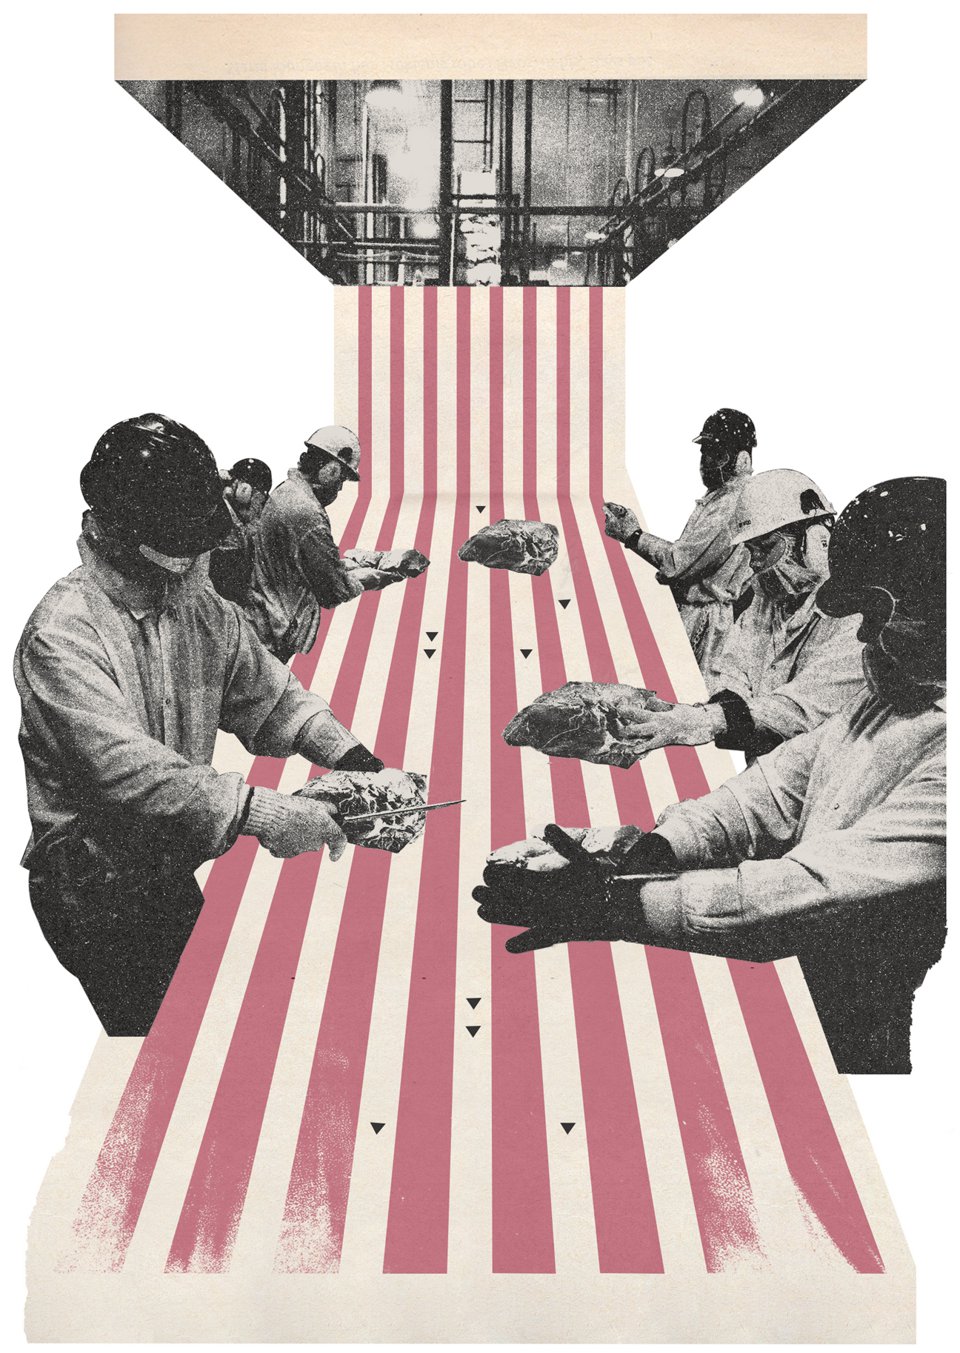 Workers handling meat along an illustrated conveyor belt